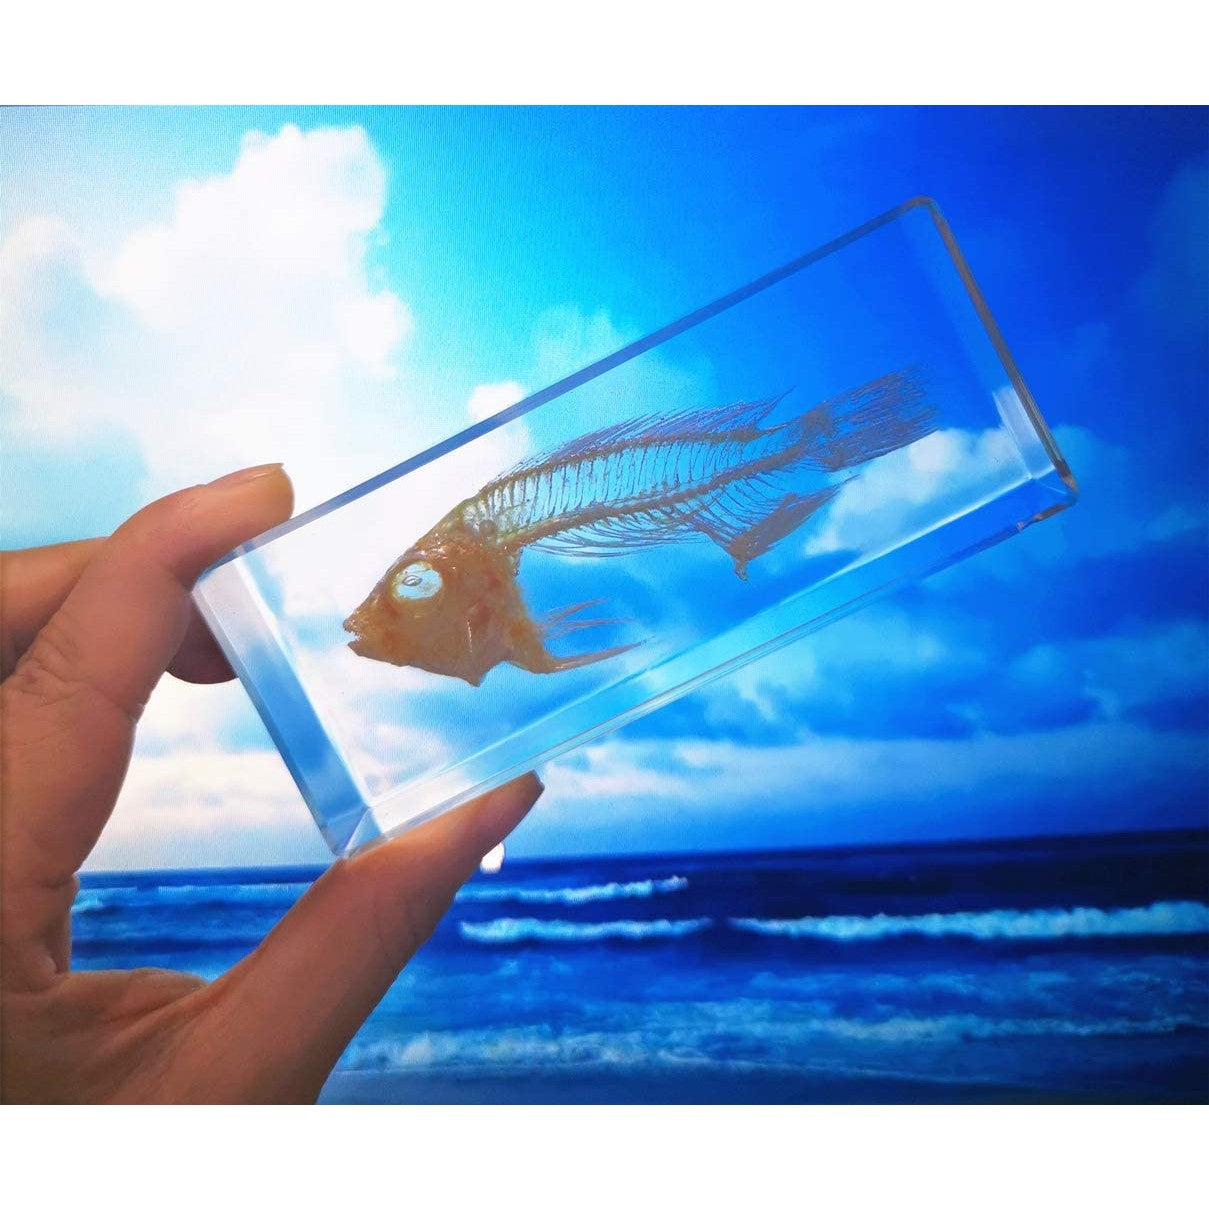 A hand is holding a fish skeleton paperweight up into the air against a background which includes the sky and ocean.